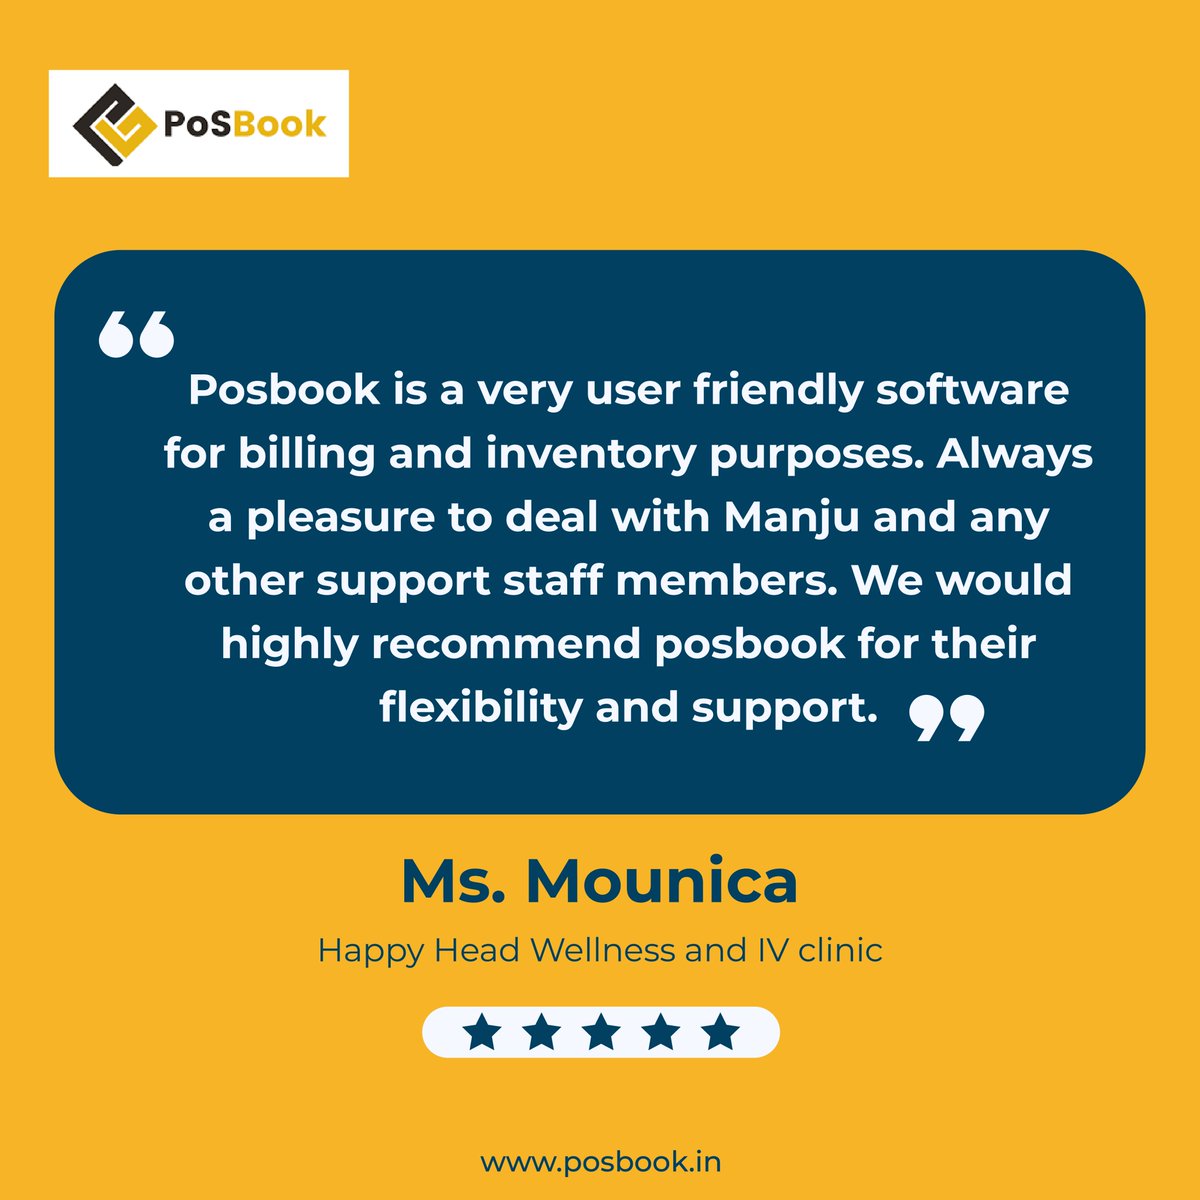 Discover the power of PoSBook365! Hear from salon owners who have achieved remarkable success with our salon management software. Don't miss out on growth opportunities!

#salonsoftware #salonowner #salonservices #salonmanagement #BusinessProductivity #beautyindustryprofessionals